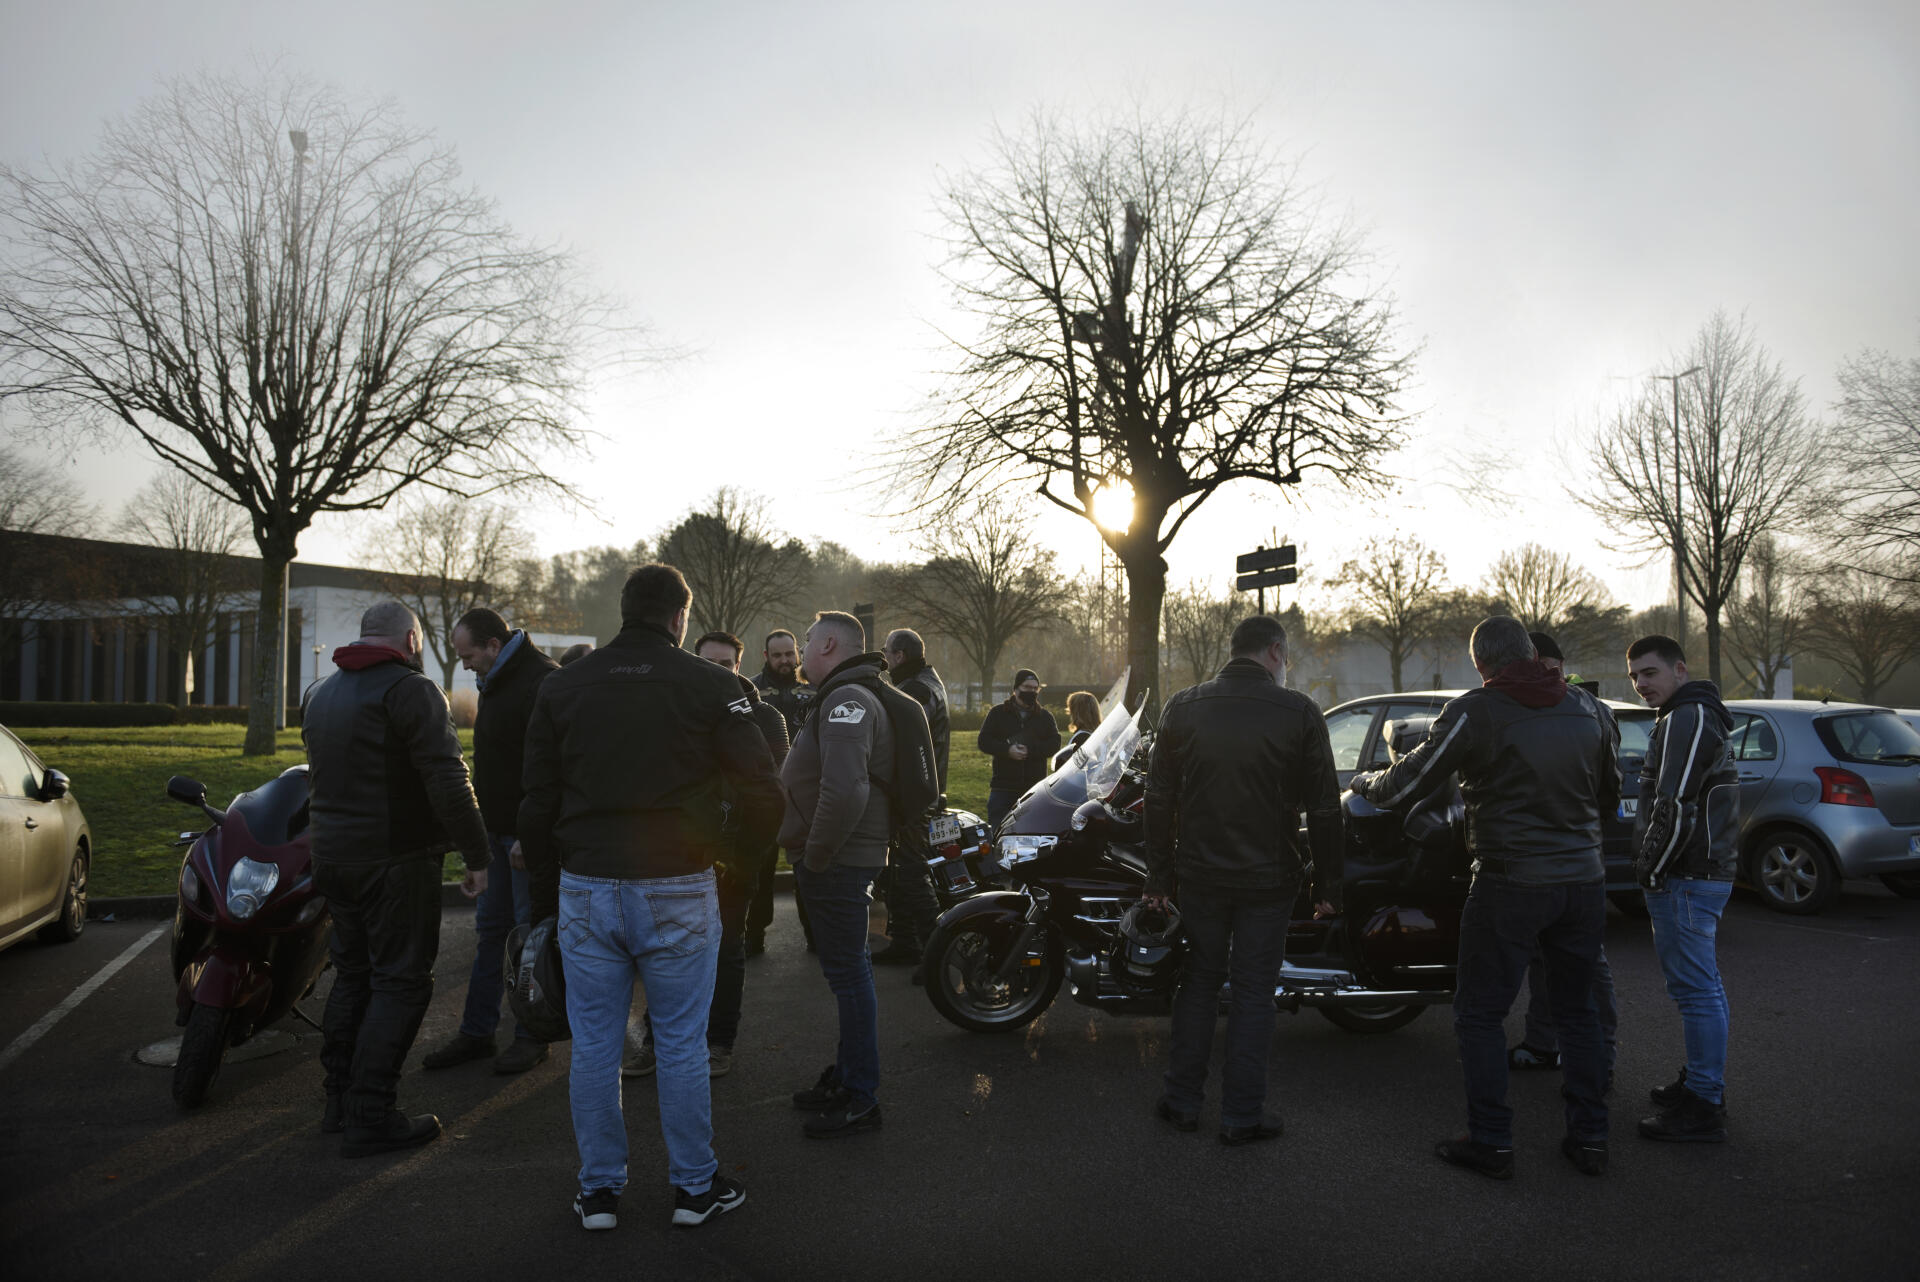 The bikers met in the Super U car park before going in front of the Camille-Claudel high school, in Caen (Calvados), on December 17, 2021.